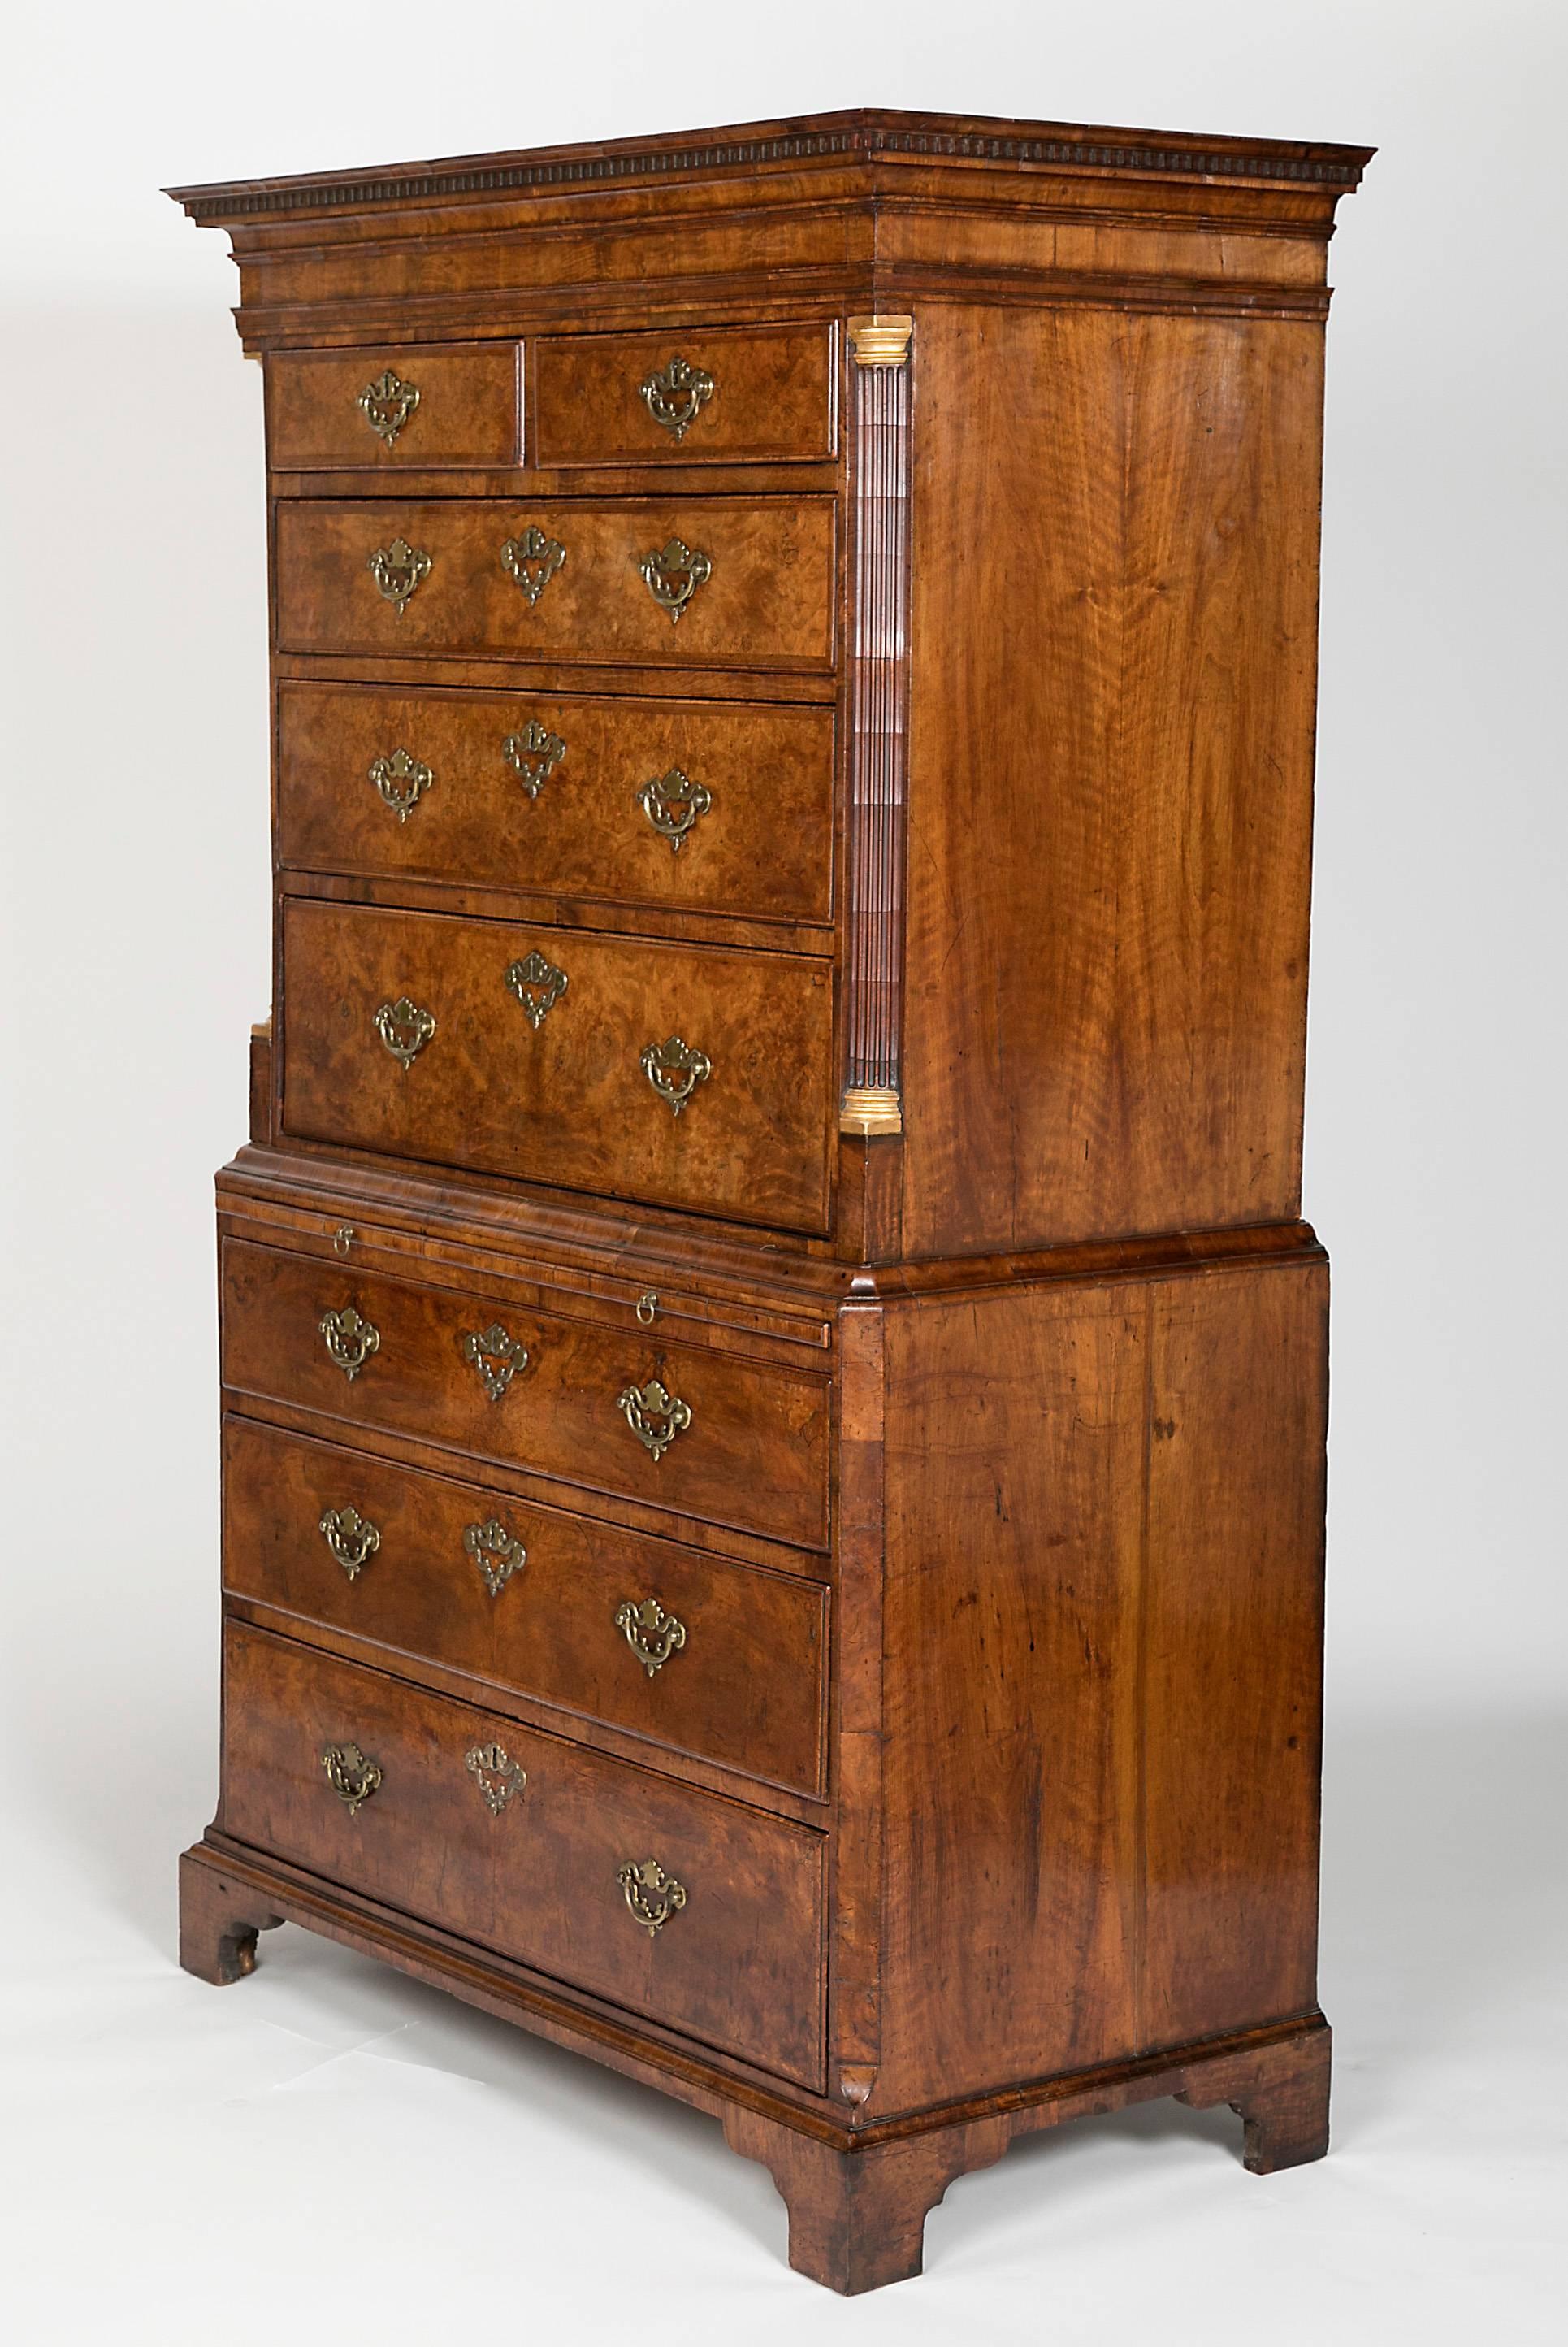 With dentilled cornice and two over three graduated drawers and flanked by reeded quarter columns, the base with a brushing slide and three drawers, top and bottom with original handles, bracket feet. Provenance; Koger estate.